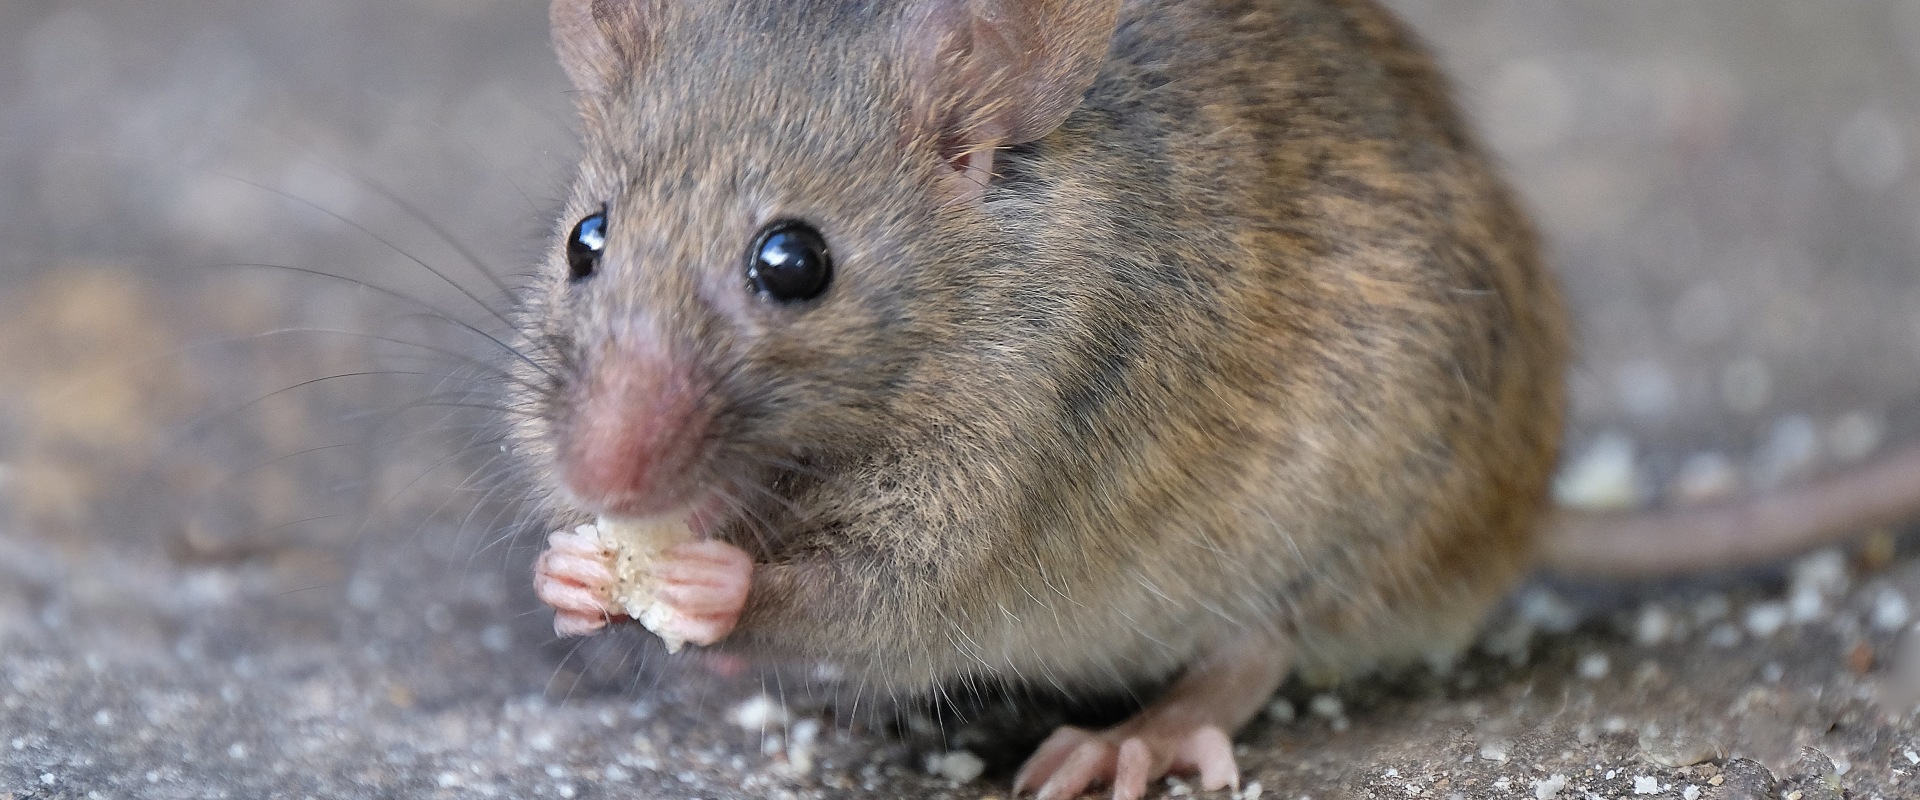 Does pest control help with mice?